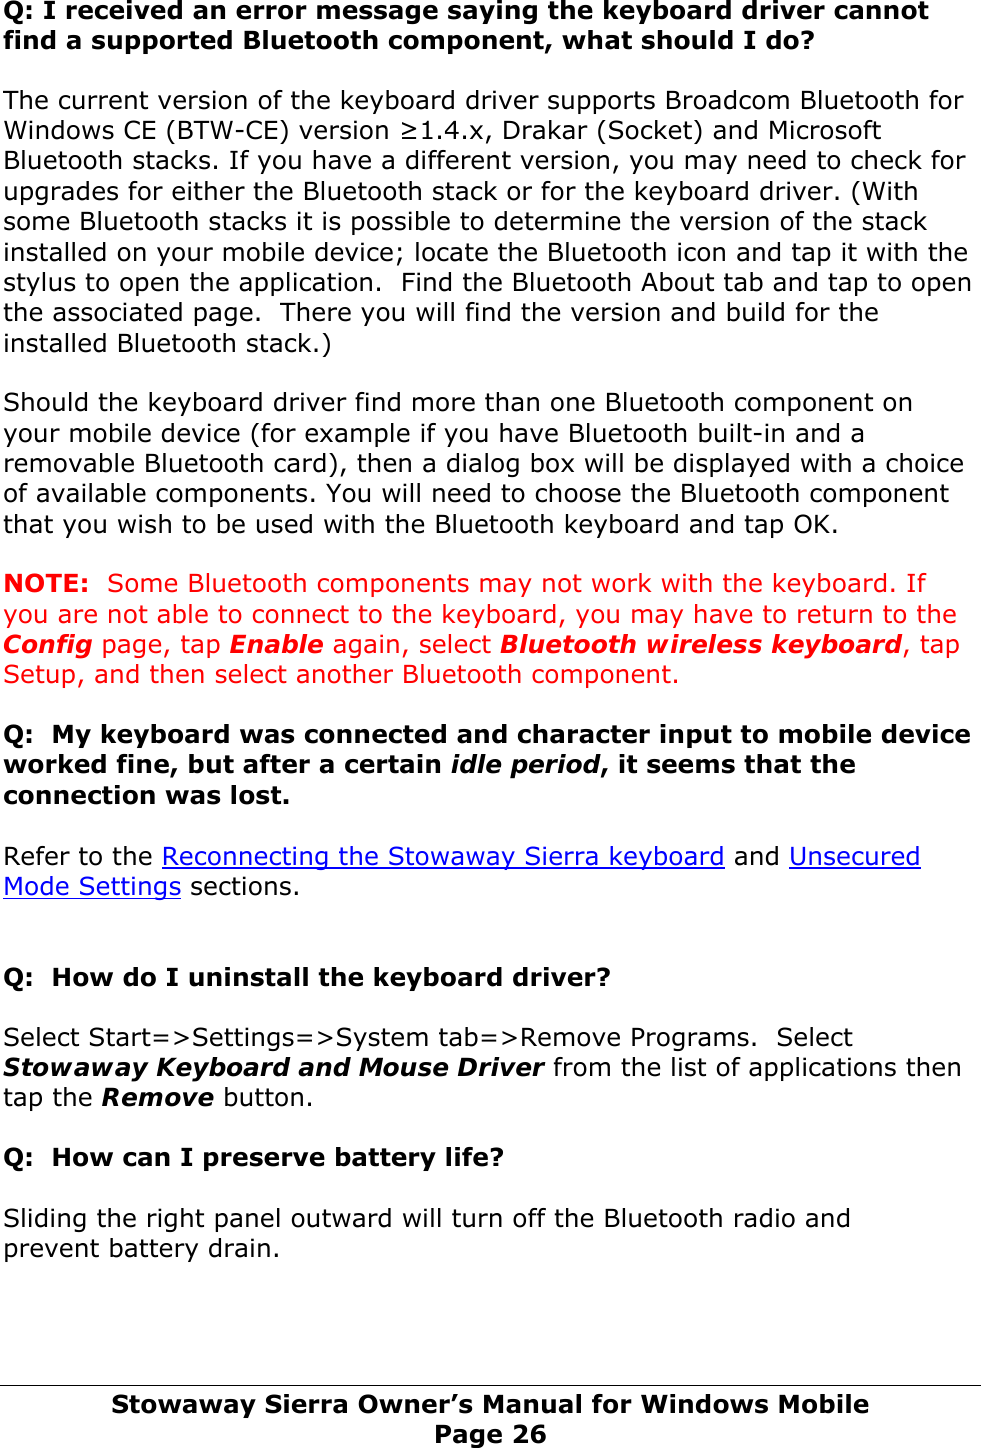 Q: I received an error message saying the keyboard driver cannot find a supported Bluetooth component, what should I do? The current version of the keyboard driver supports Broadcom Bluetooth for Windows CE (BTW-CE) version ≥1.4.x, Drakar (Socket) and Microsoft Bluetooth stacks. If you have a different version, you may need to check for upgrades for either the Bluetooth stack or for the keyboard driver. (With some Bluetooth stacks it is possible to determine the version of the stack installed on your mobile device; locate the Bluetooth icon and tap it with the stylus to open the application.  Find the Bluetooth About tab and tap to open the associated page.  There you will find the version and build for the installed Bluetooth stack.) Should the keyboard driver find more than one Bluetooth component on your mobile device (for example if you have Bluetooth built-in and a removable Bluetooth card), then a dialog box will be displayed with a choice of available components. You will need to choose the Bluetooth component that you wish to be used with the Bluetooth keyboard and tap OK.  NOTE:  Some Bluetooth components may not work with the keyboard. If you are not able to connect to the keyboard, you may have to return to the Config page, tap Enable again, select Bluetooth wireless keyboard, tap Setup, and then select another Bluetooth component.  Q:  My keyboard was connected and character input to mobile device worked fine, but after a certain idle period, it seems that the connection was lost.  Refer to the Reconnecting the Stowaway Sierra keyboard and Unsecured Mode Settings sections.   Q:  How do I uninstall the keyboard driver? Select Start=&gt;Settings=&gt;System tab=&gt;Remove Programs.  Select Stowaway Keyboard and Mouse Driver from the list of applications then tap the Remove button. Q:  How can I preserve battery life?  Sliding the right panel outward will turn off the Bluetooth radio and prevent battery drain.    Stowaway Sierra Owner’s Manual for Windows Mobile Page 26 